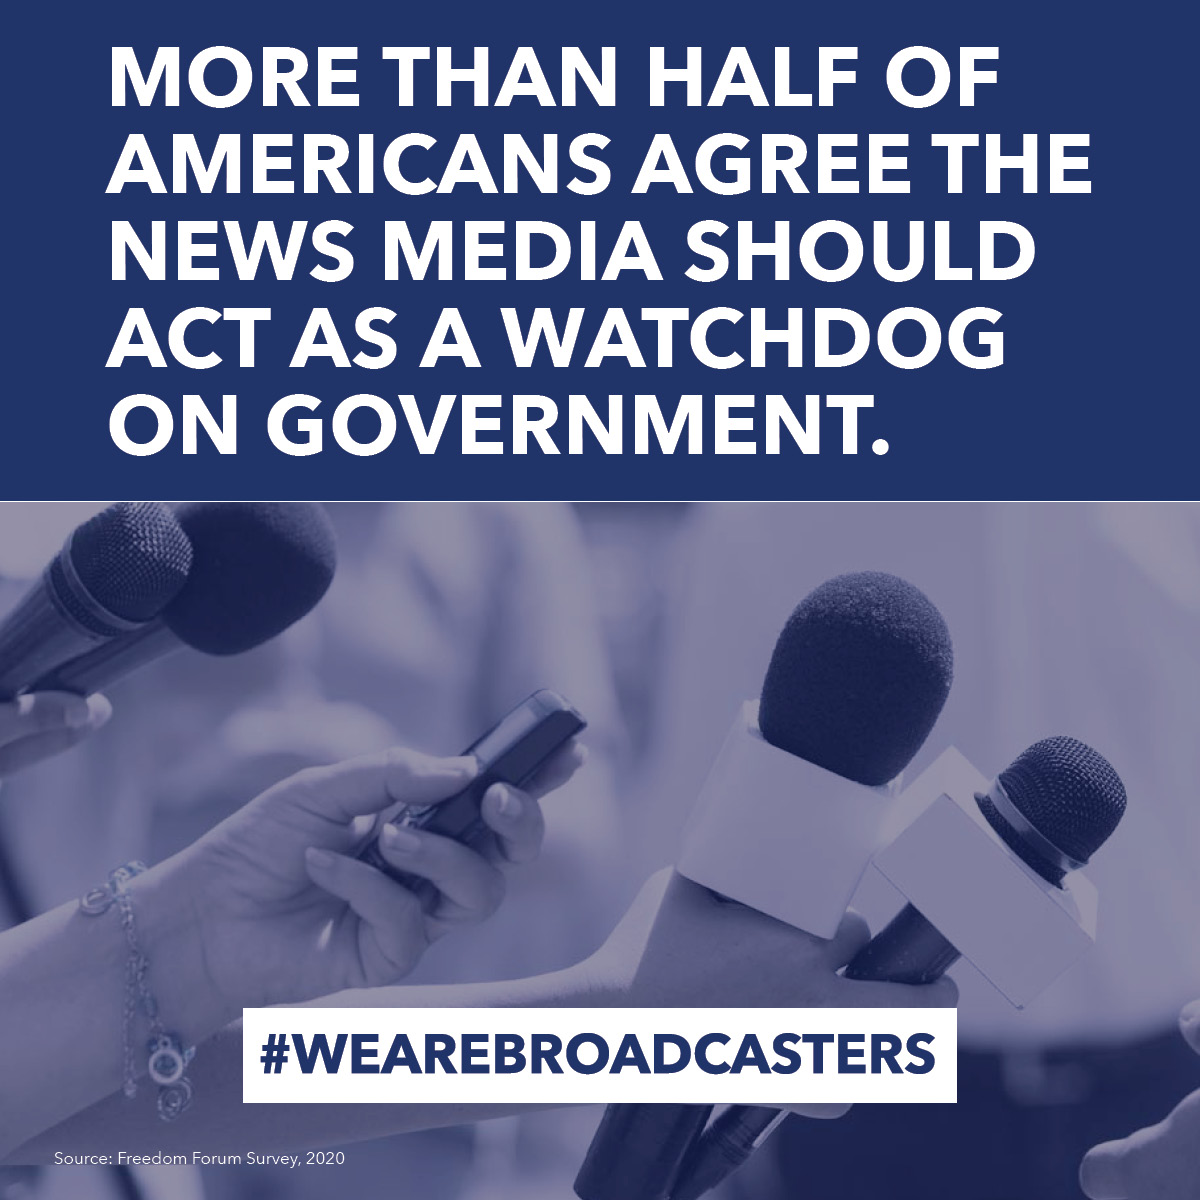 More than half of Americans agree the news media should act as a watchdog on government